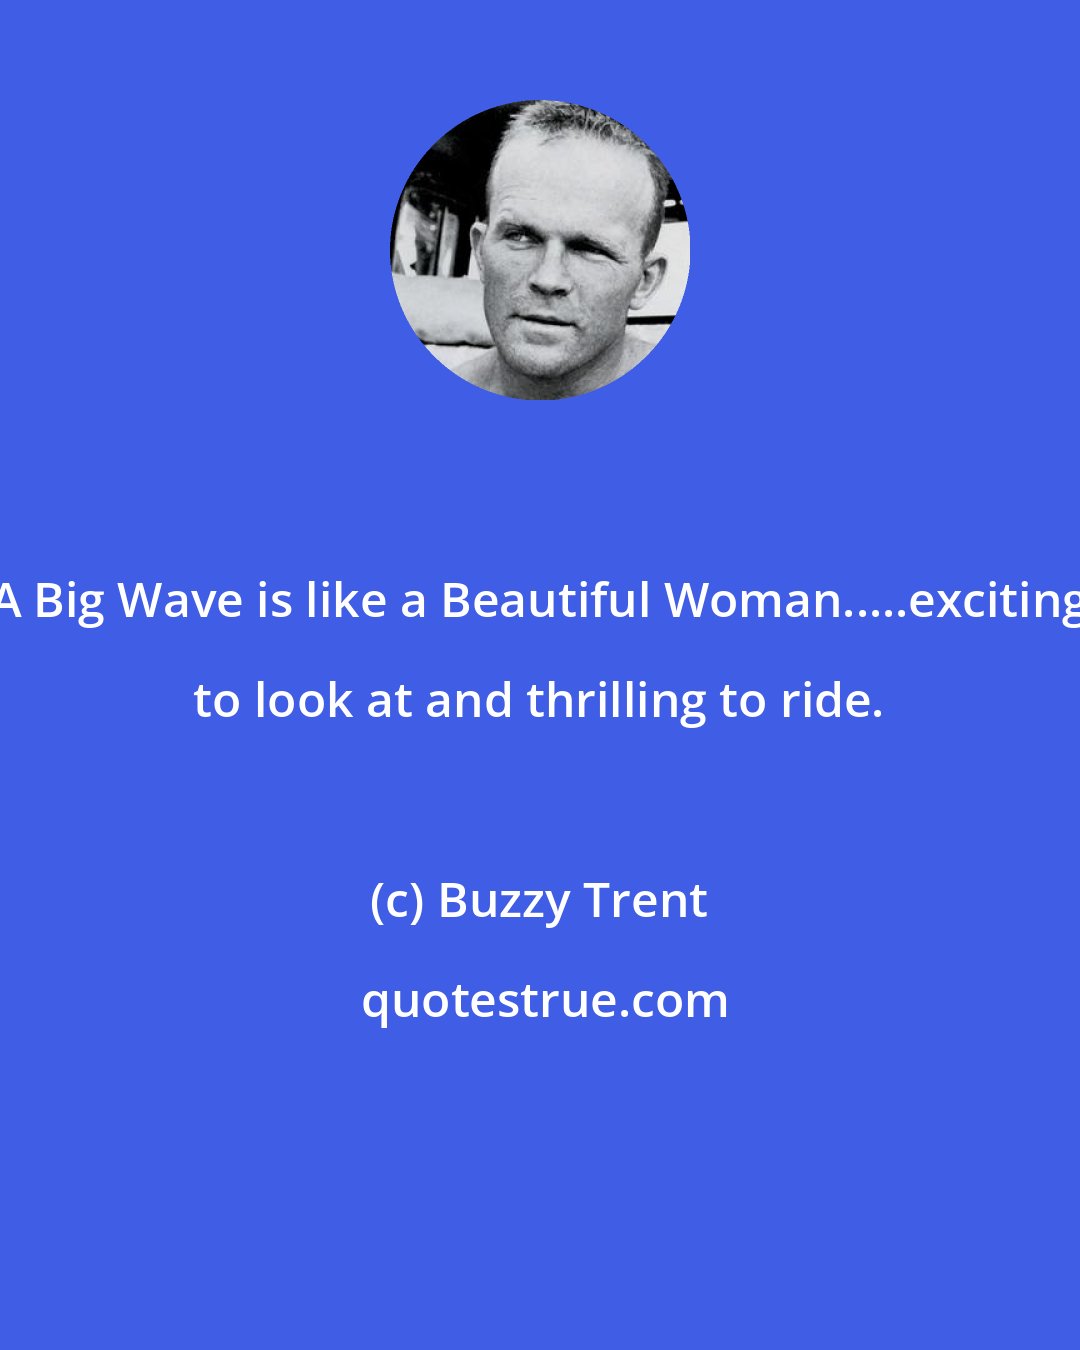 Buzzy Trent: A Big Wave is like a Beautiful Woman.....exciting to look at and thrilling to ride.